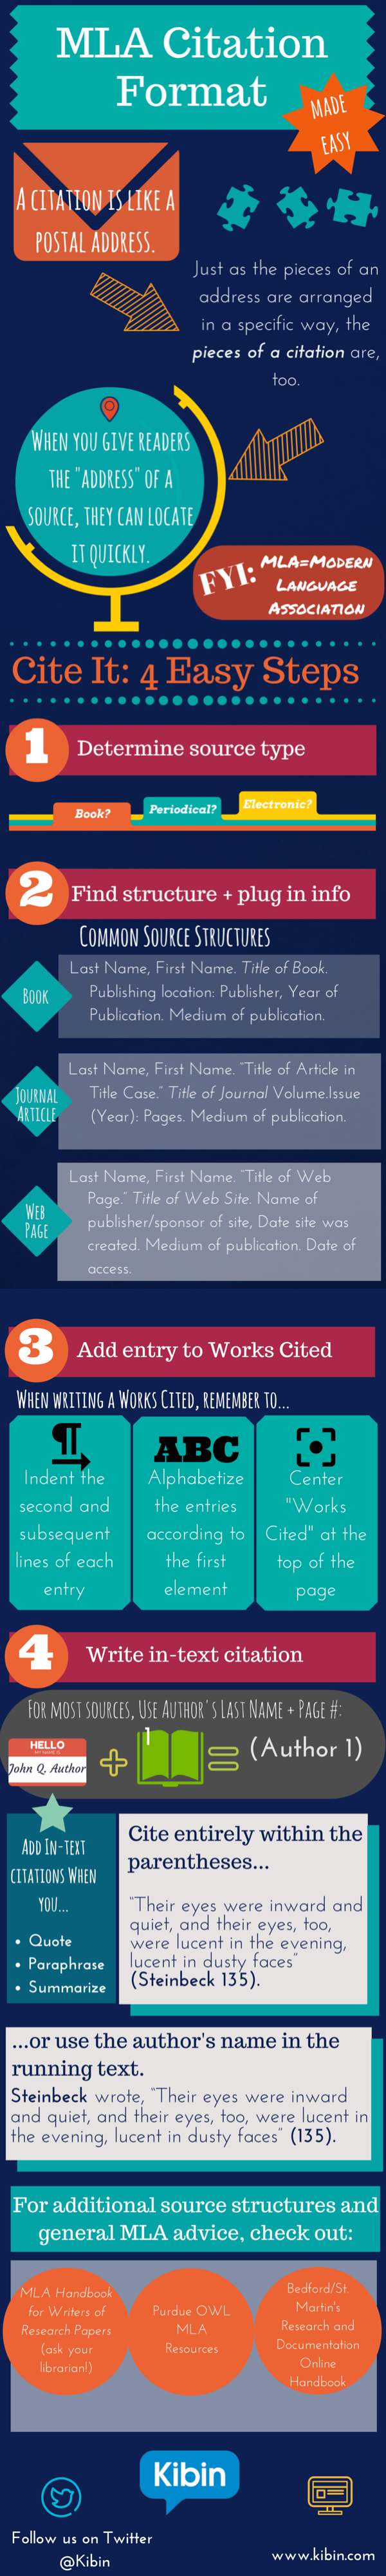 MLA Citation Format Made Easy Infographic